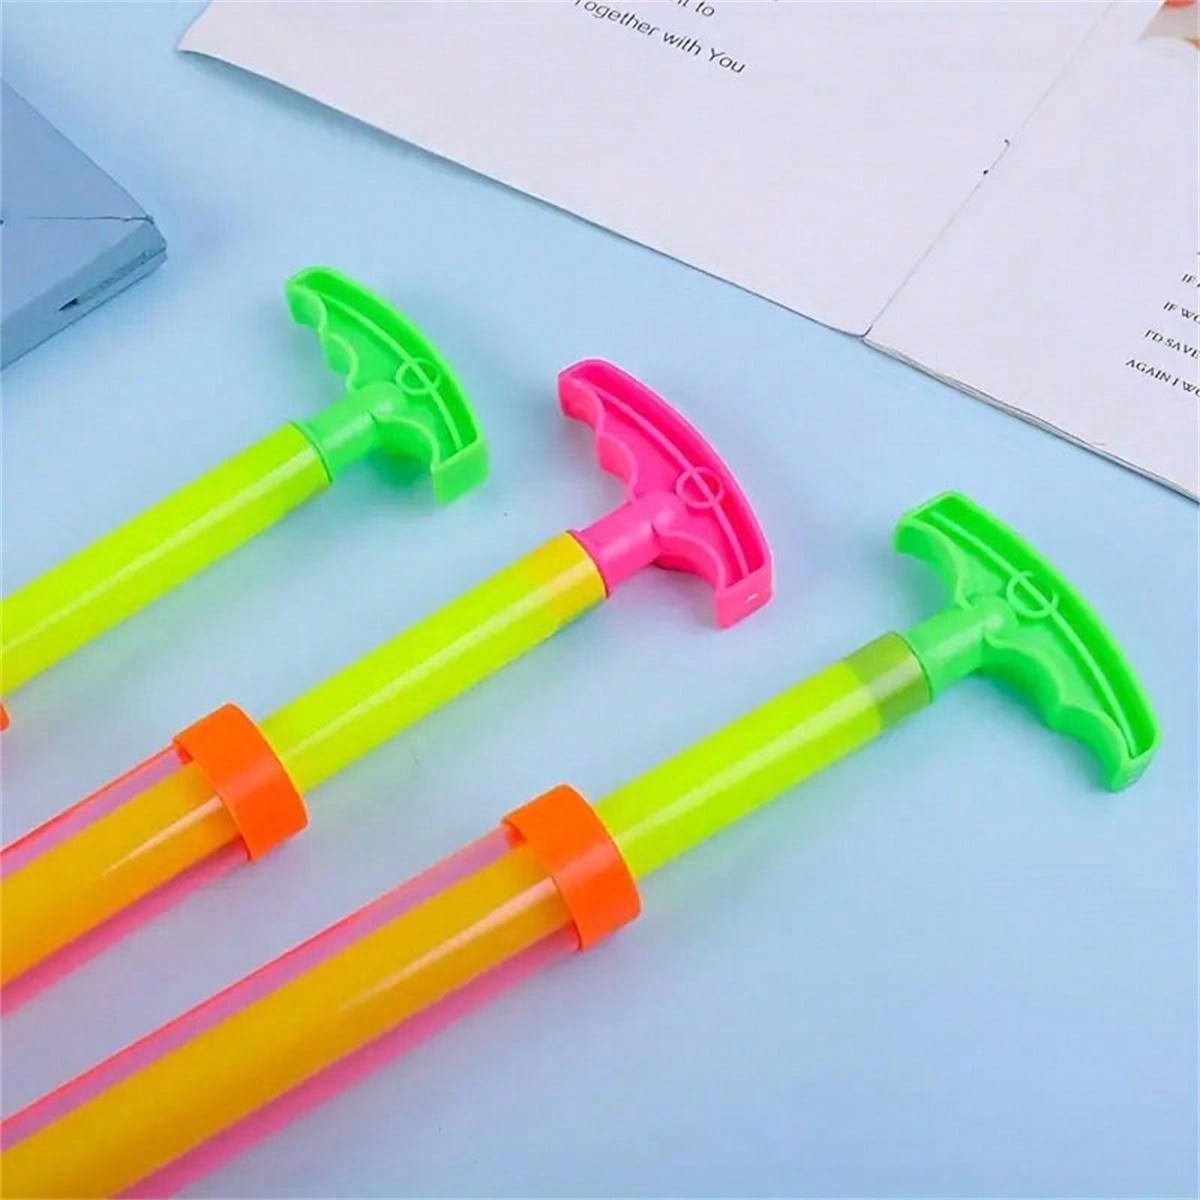 1pc Random Color Beach Water Play Toy 16.93-Inch Extendable Water Pump Water Gun Pool Toys